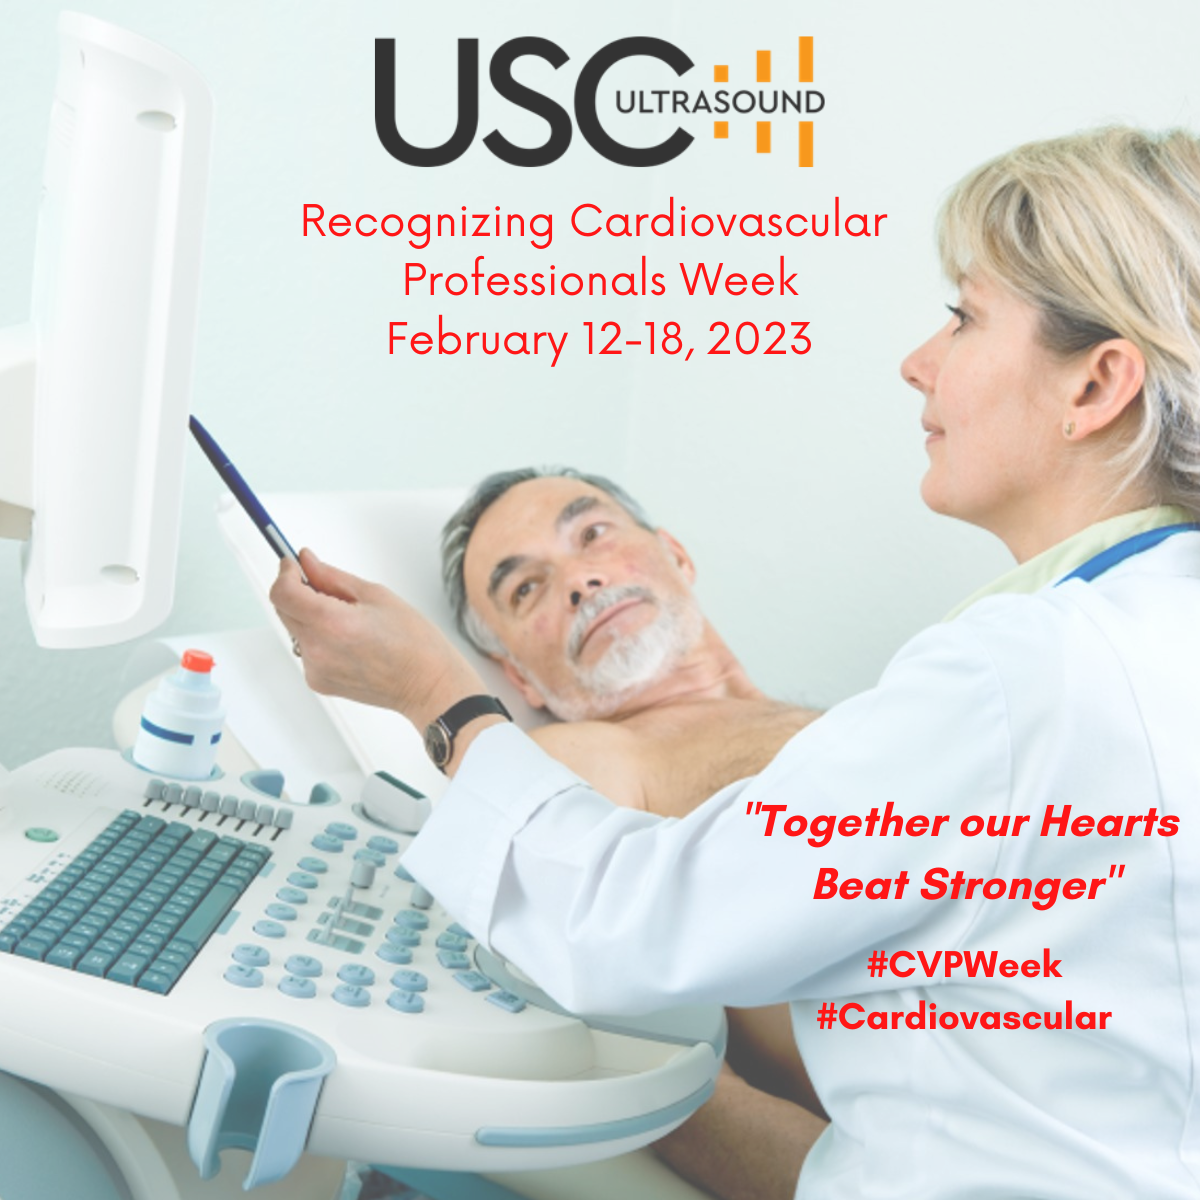 Ultrasound in Cardiovascular Applications